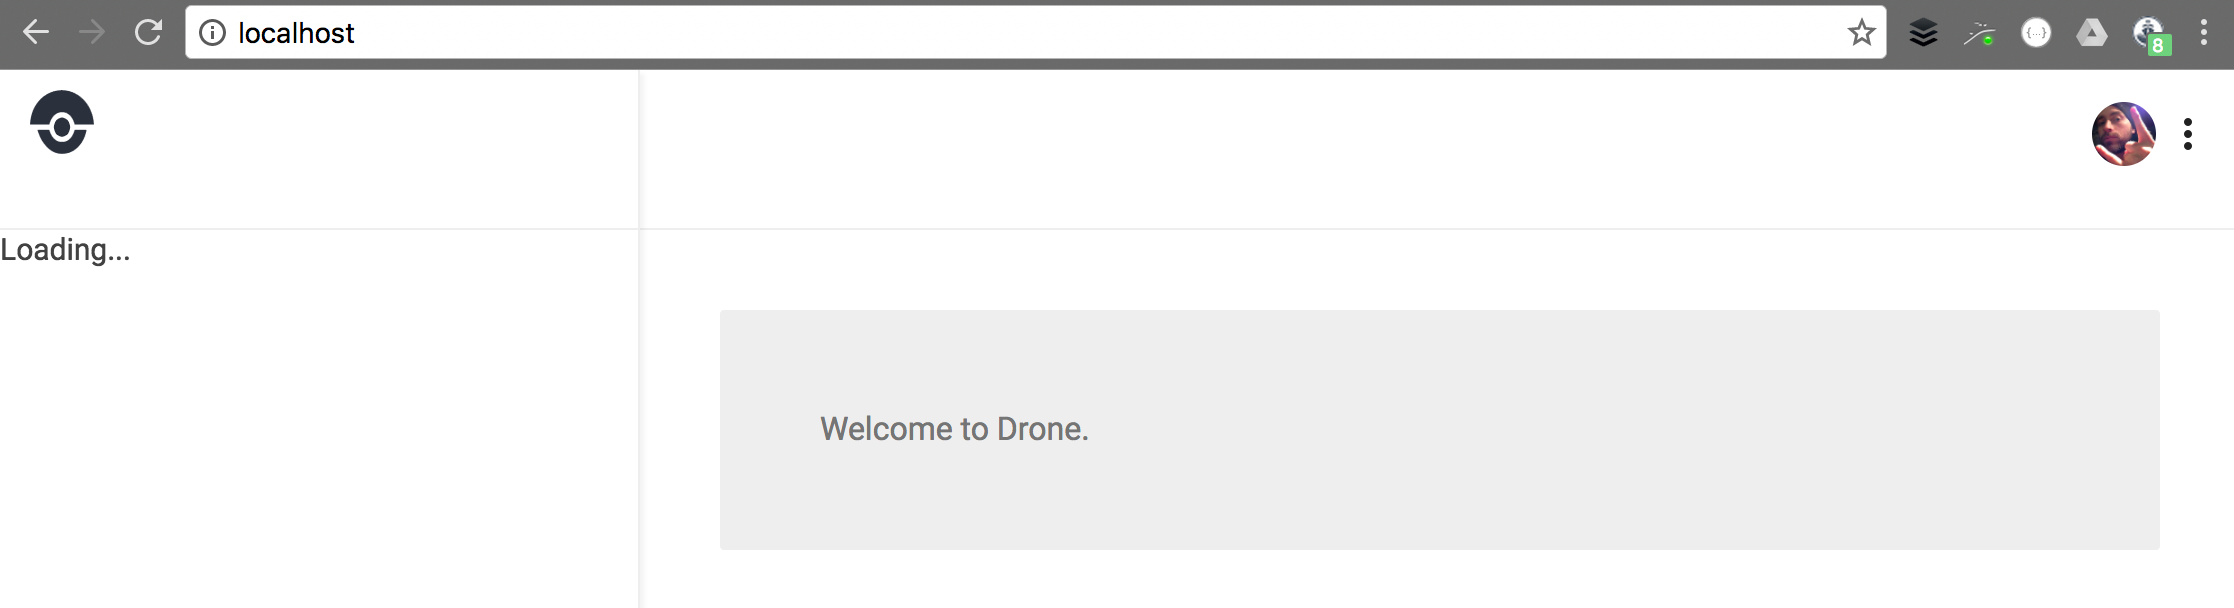 Welcome Drone!